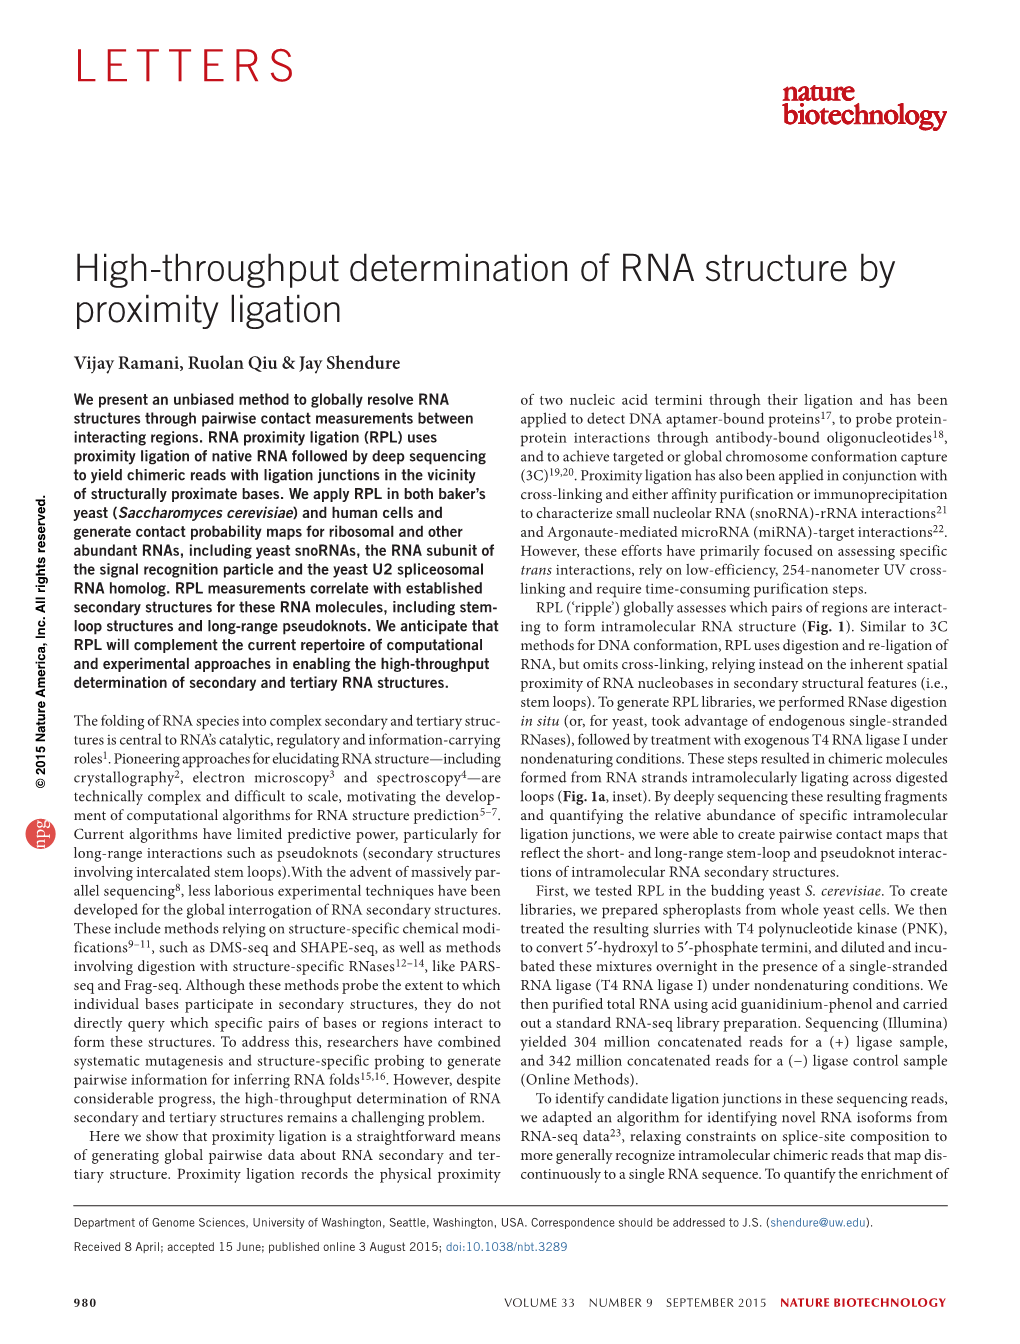 High-Throughput Determination of RNA Structure by Proximity Ligation